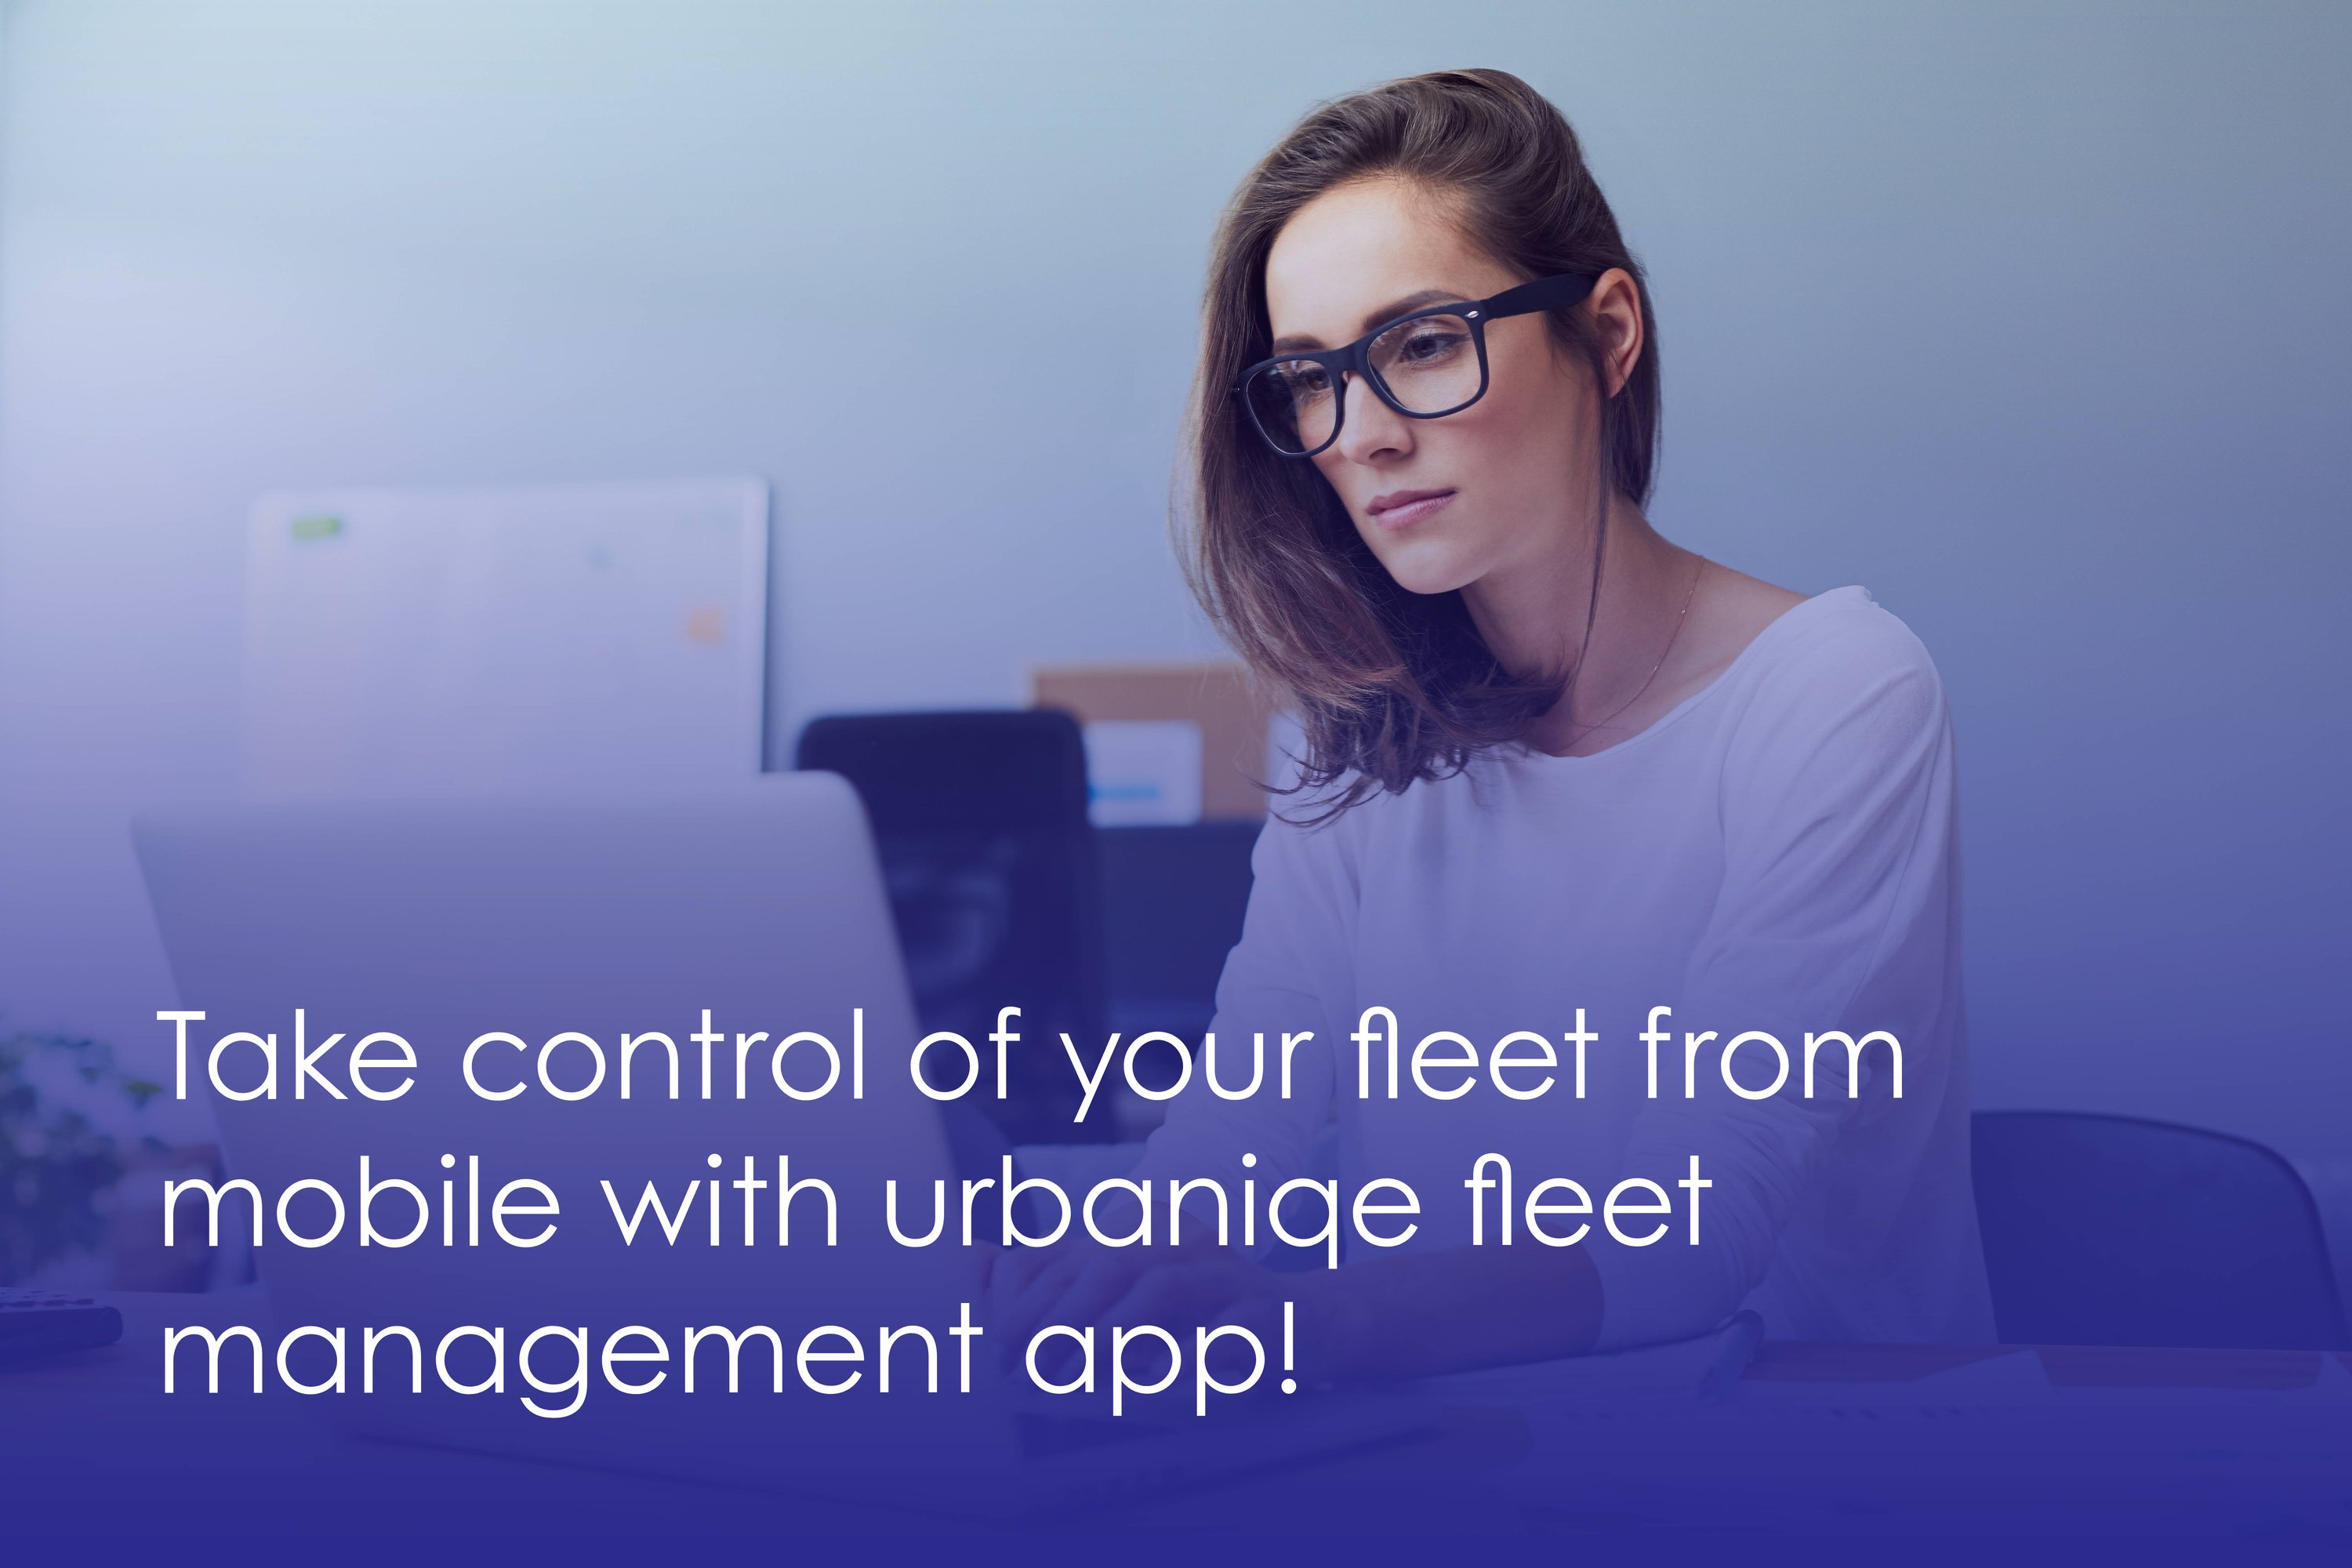 Take control of your fleet from mobil with urbaniqe fleet management app